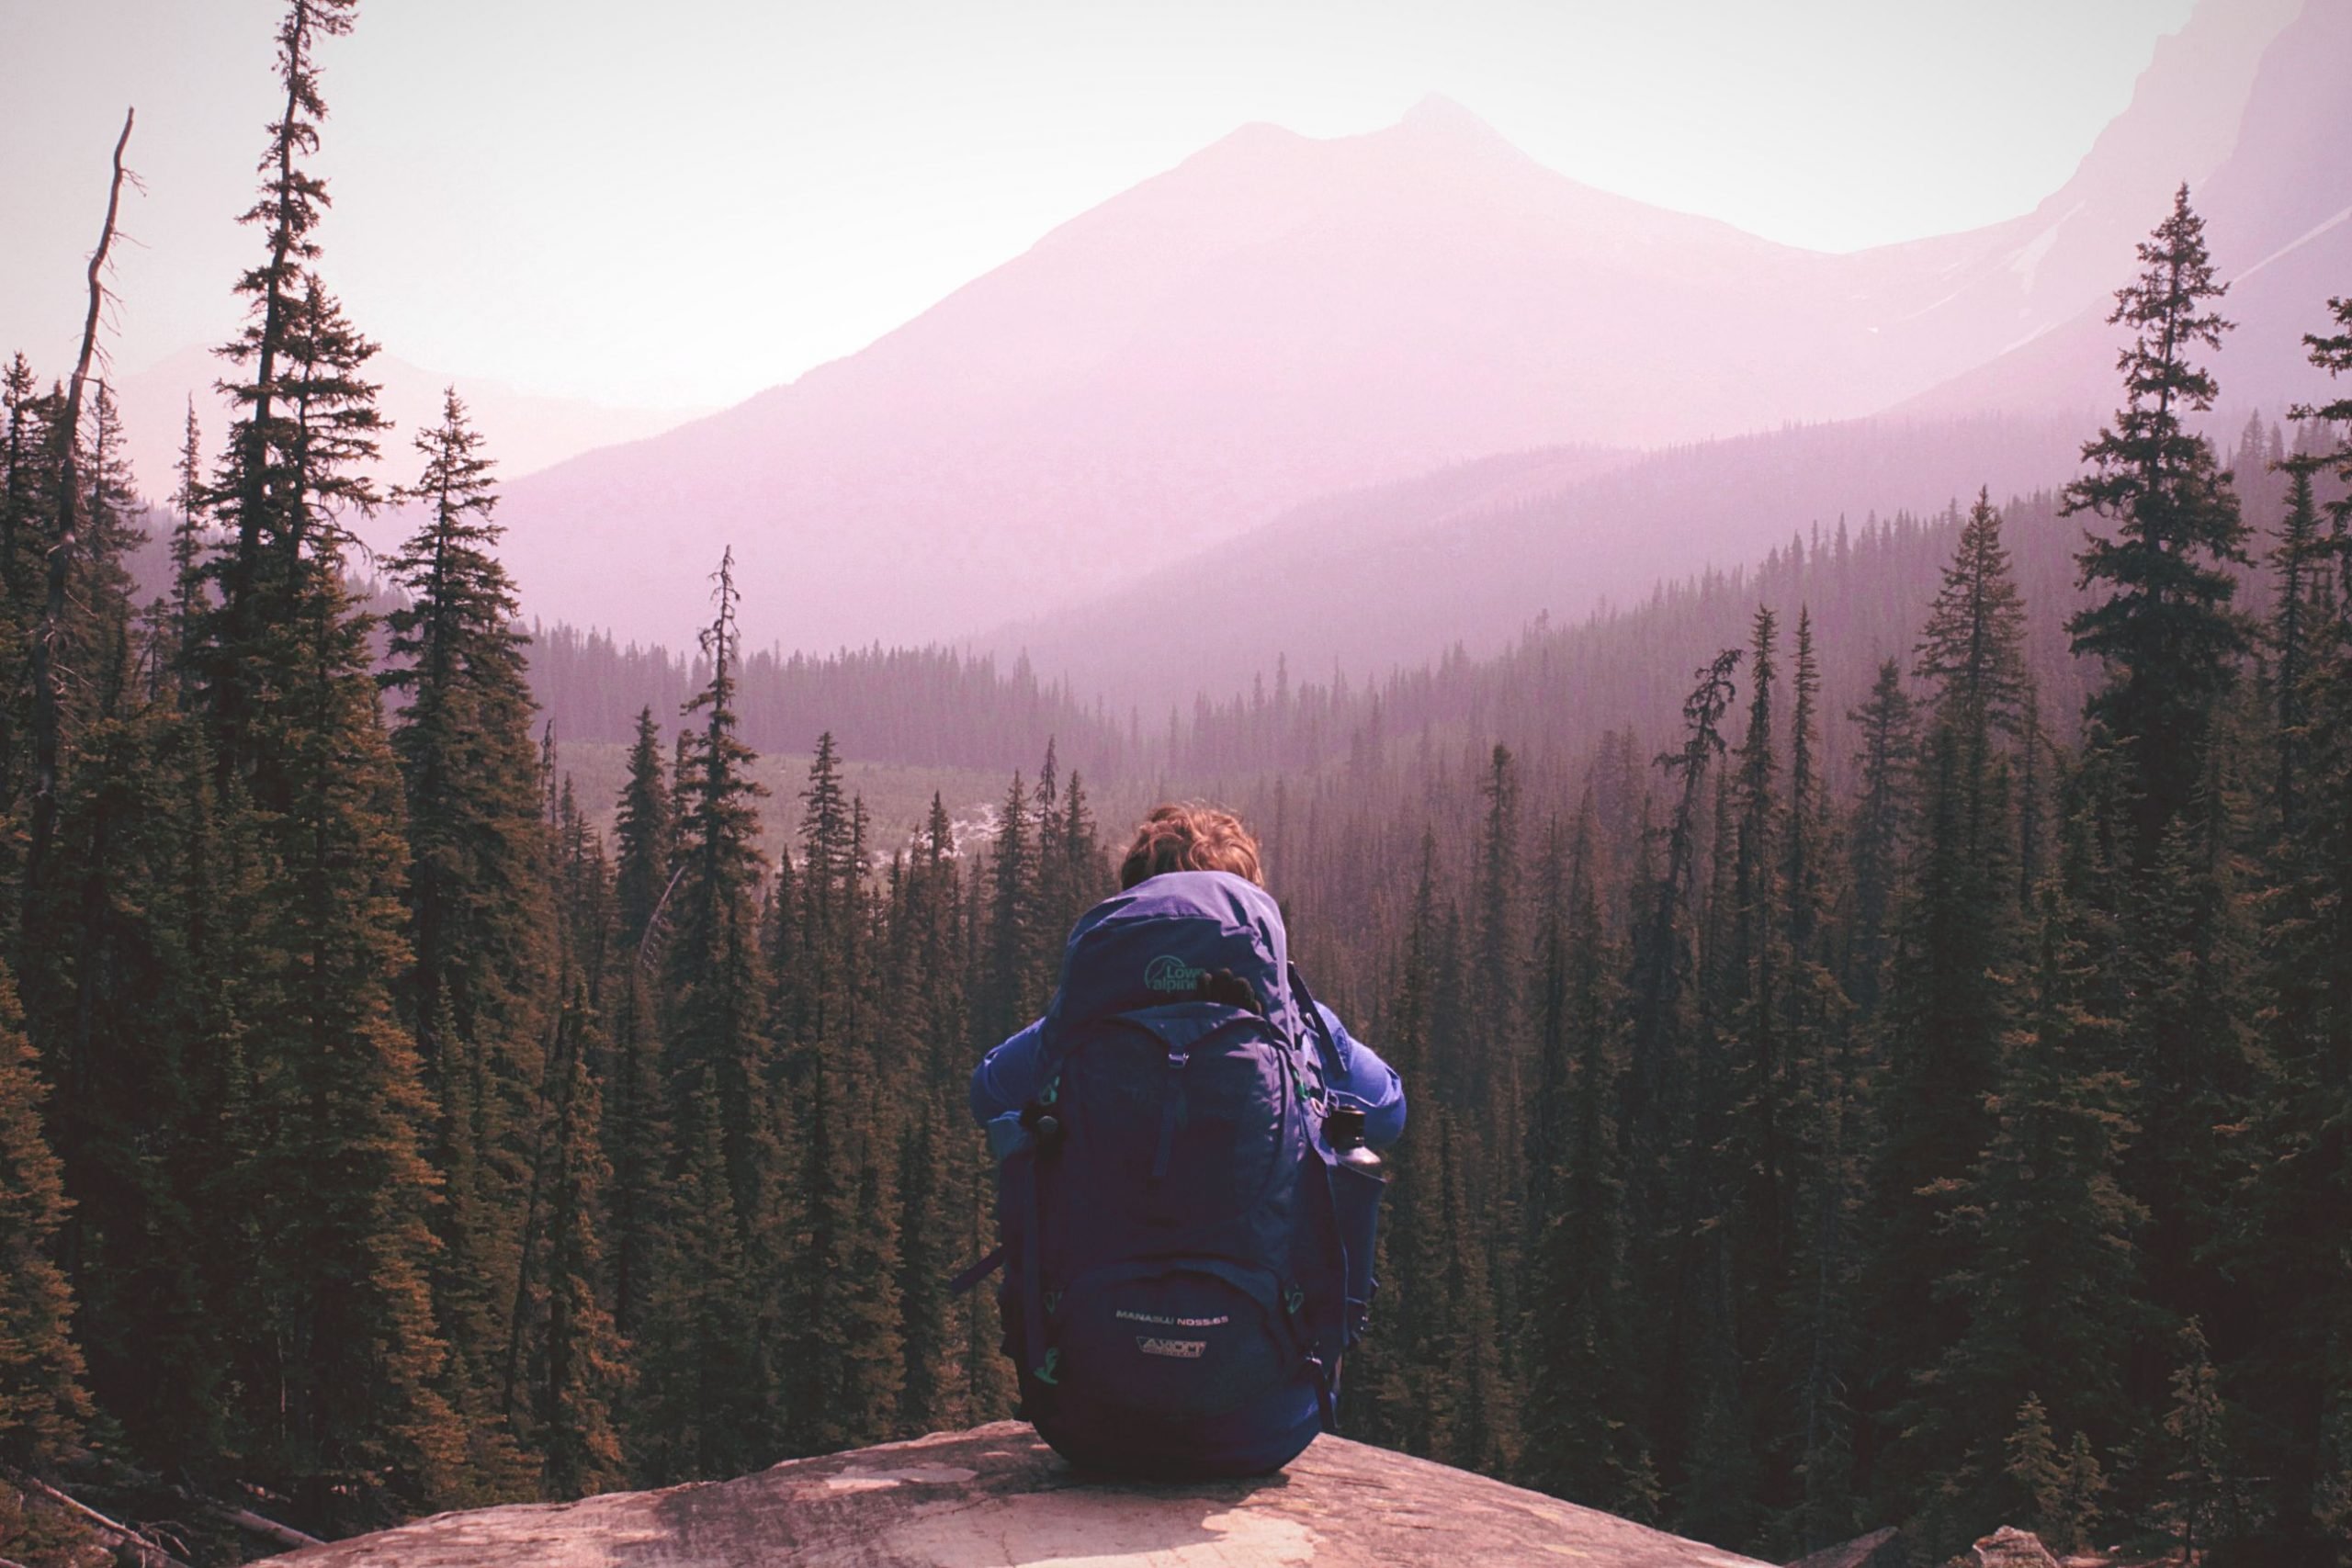 A hiker sitting on a rock, wearing a backpack, looking out at pine forest and mountains.